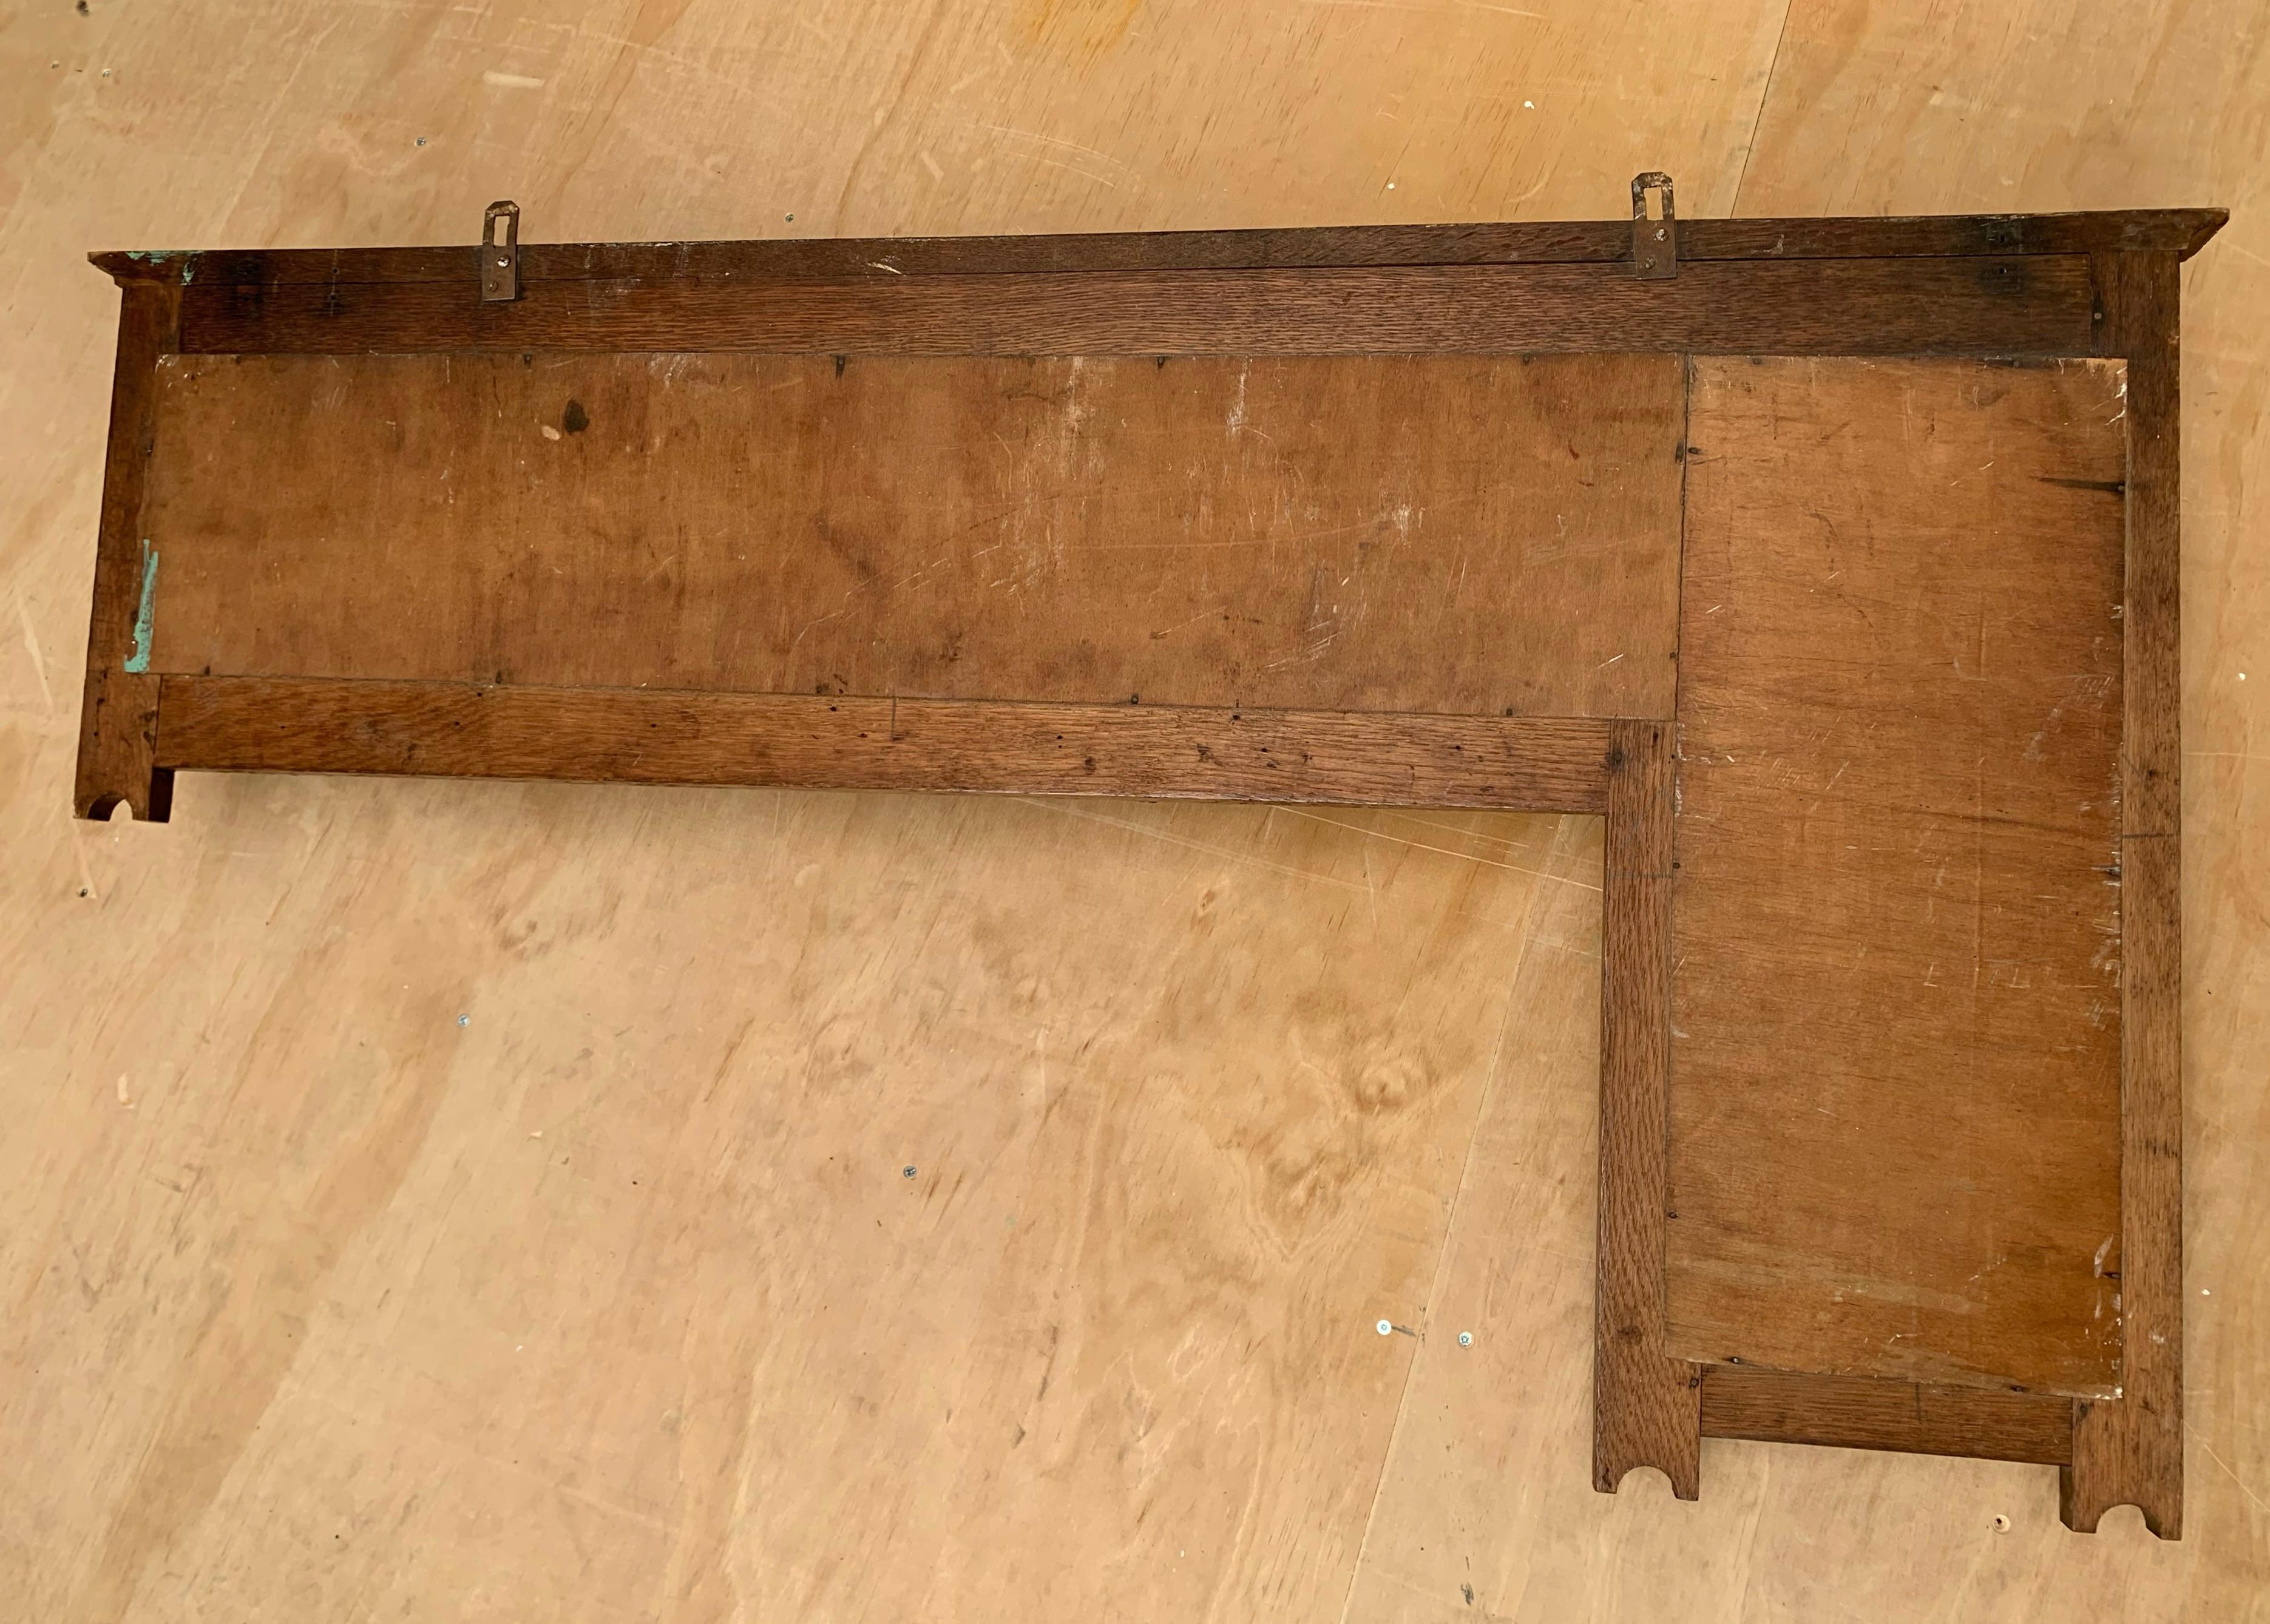 circa 1910 Arts & Crafts Oak Wall Coat Rack, Beveled Mirror & Hand Painted Tiles For Sale 10